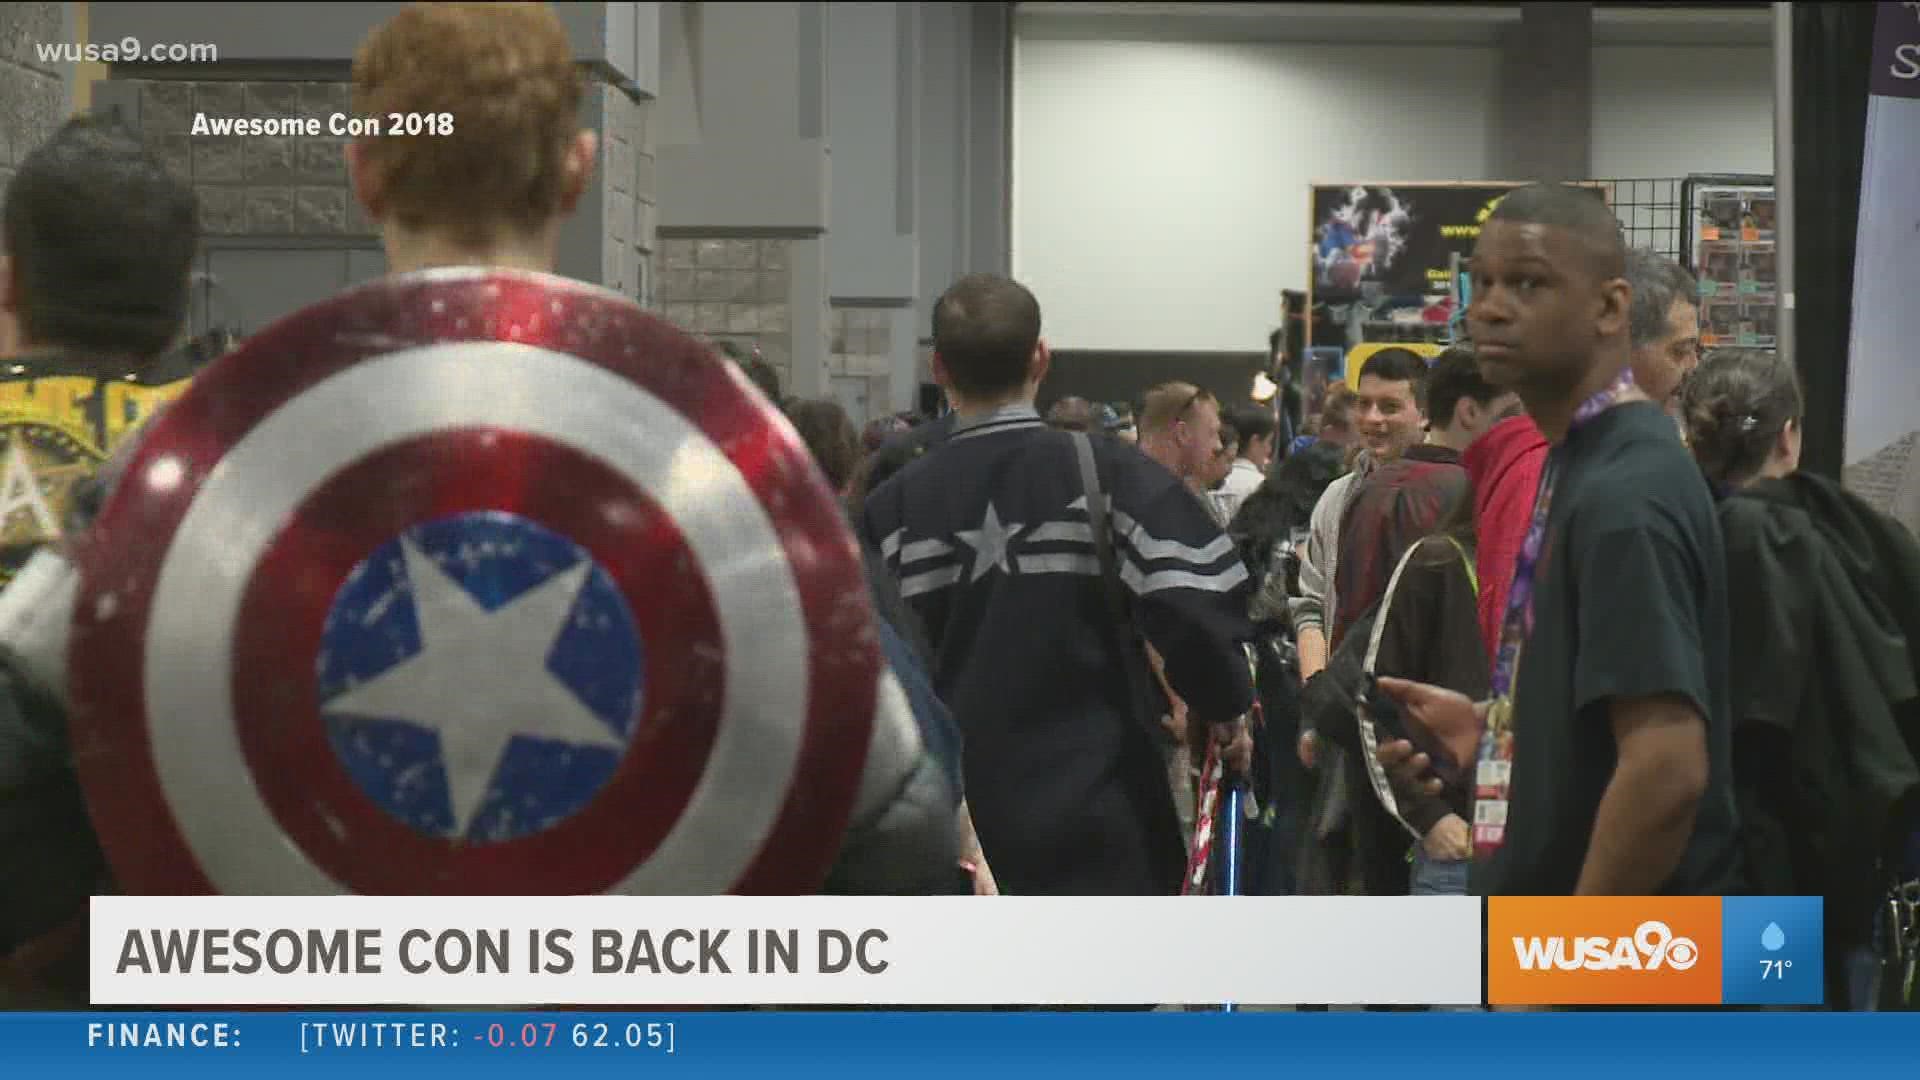 Awesome Con 2021 is back this weekend Aug. 20 - 22nd at the Walter E. Washington Convention Center. We talk to the voice of the Capitals, Wes Johnson all about it.